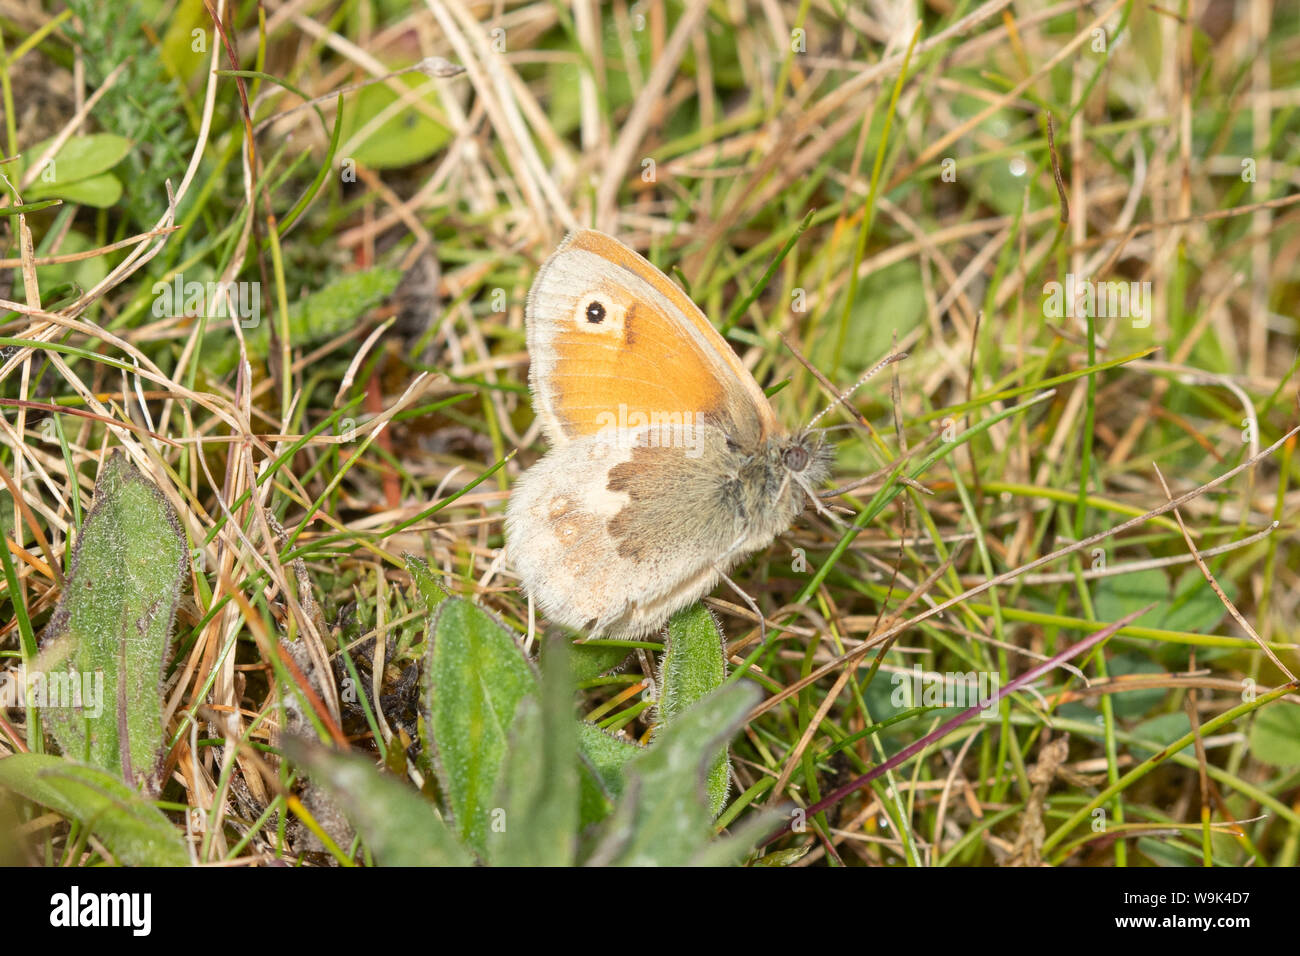 Small heath butterfly (Coenonympha pamphilus) on the grass, UK Stock Photo